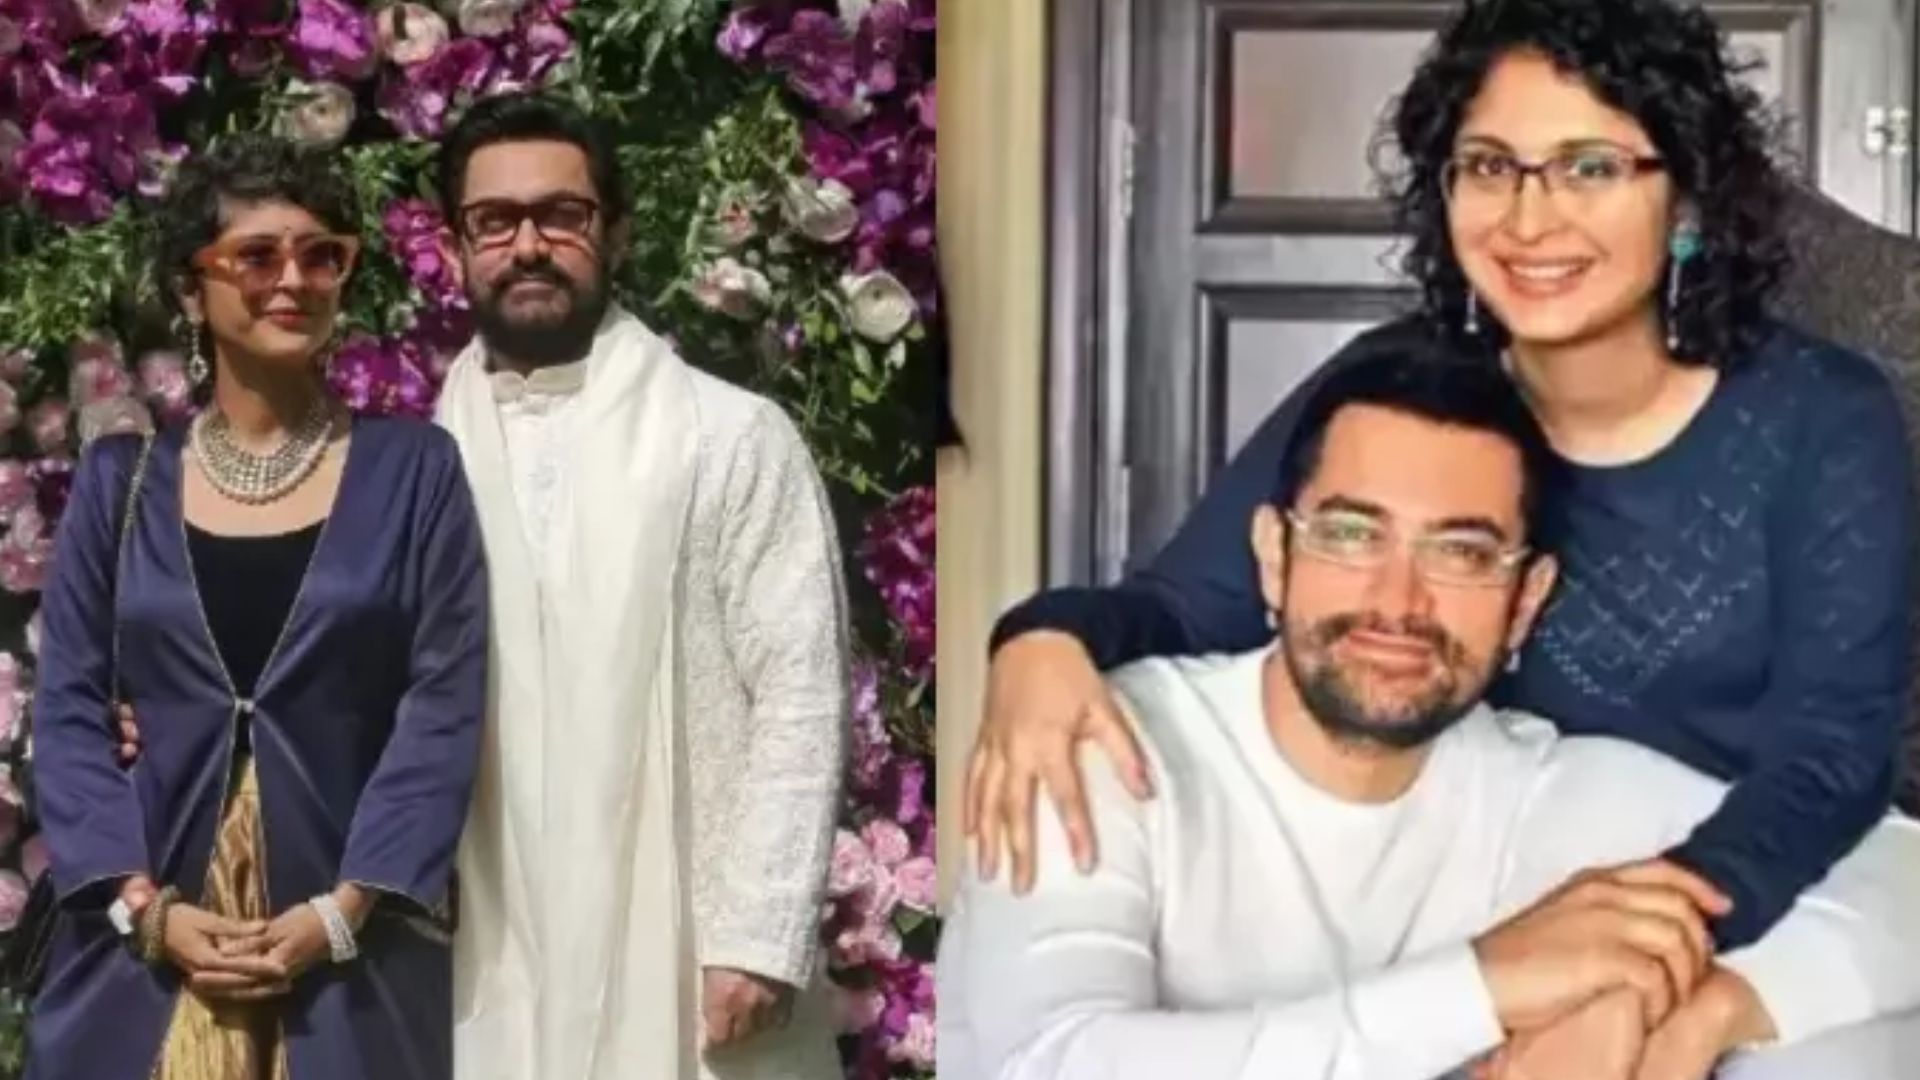 Kiran Rao Reflects on Relationship with Aamir Khan: ‘Never Had Big Fights,’ Mutual Understanding Prevails